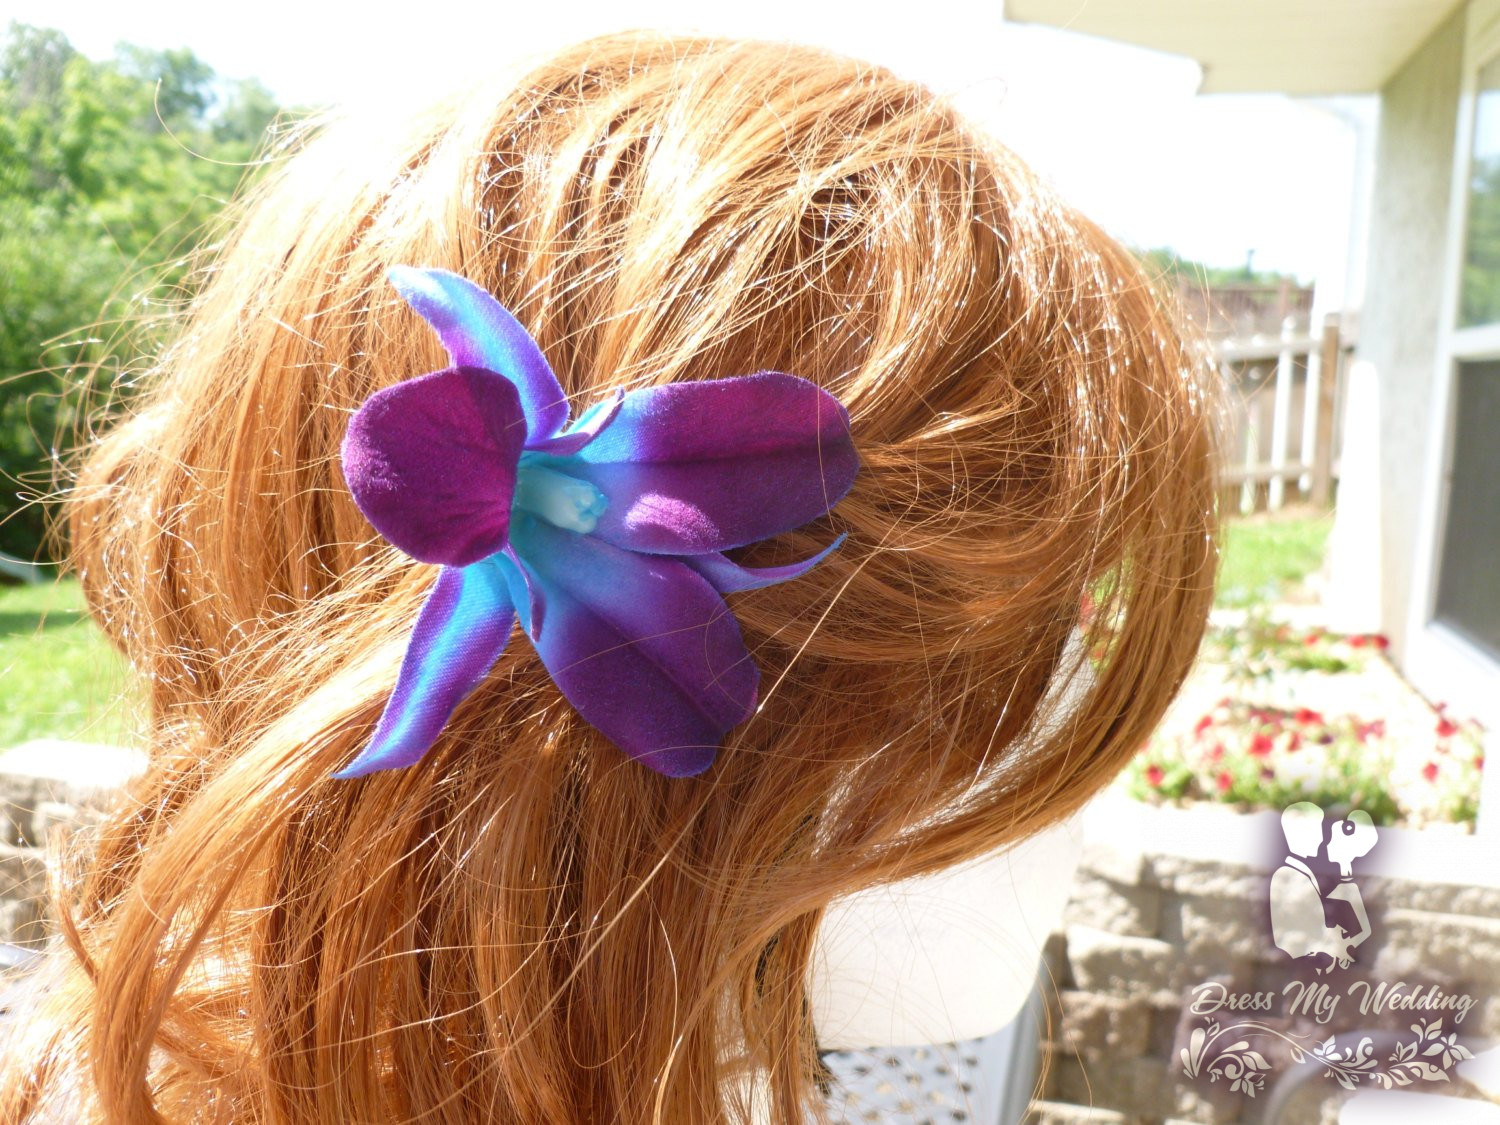 7. "Cobalt Blue Orchid Hair Accessory" - wide 7